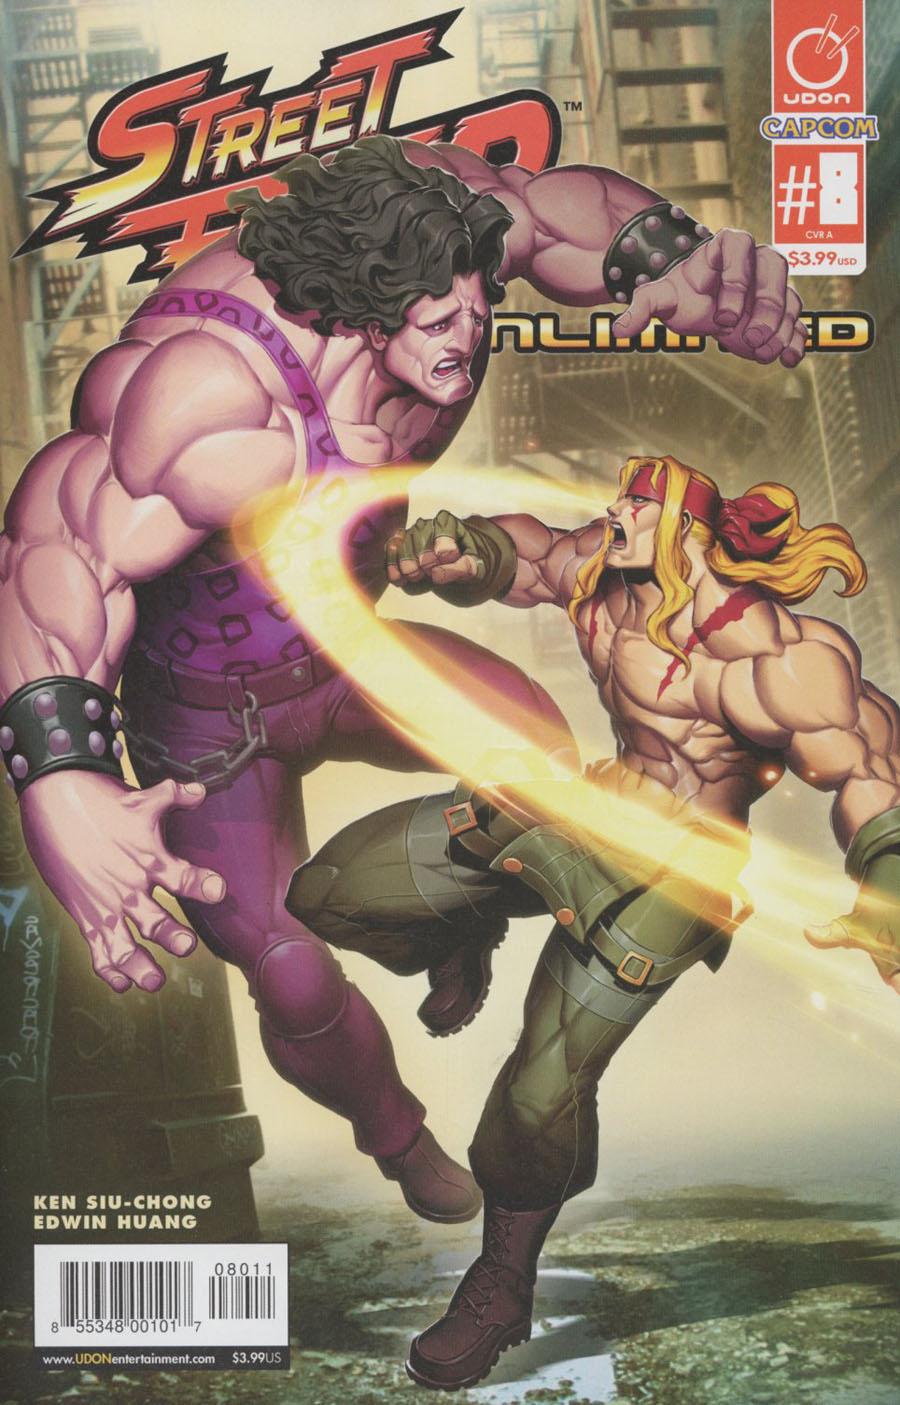 Street Fighter Unlimited Vol. 1 #8